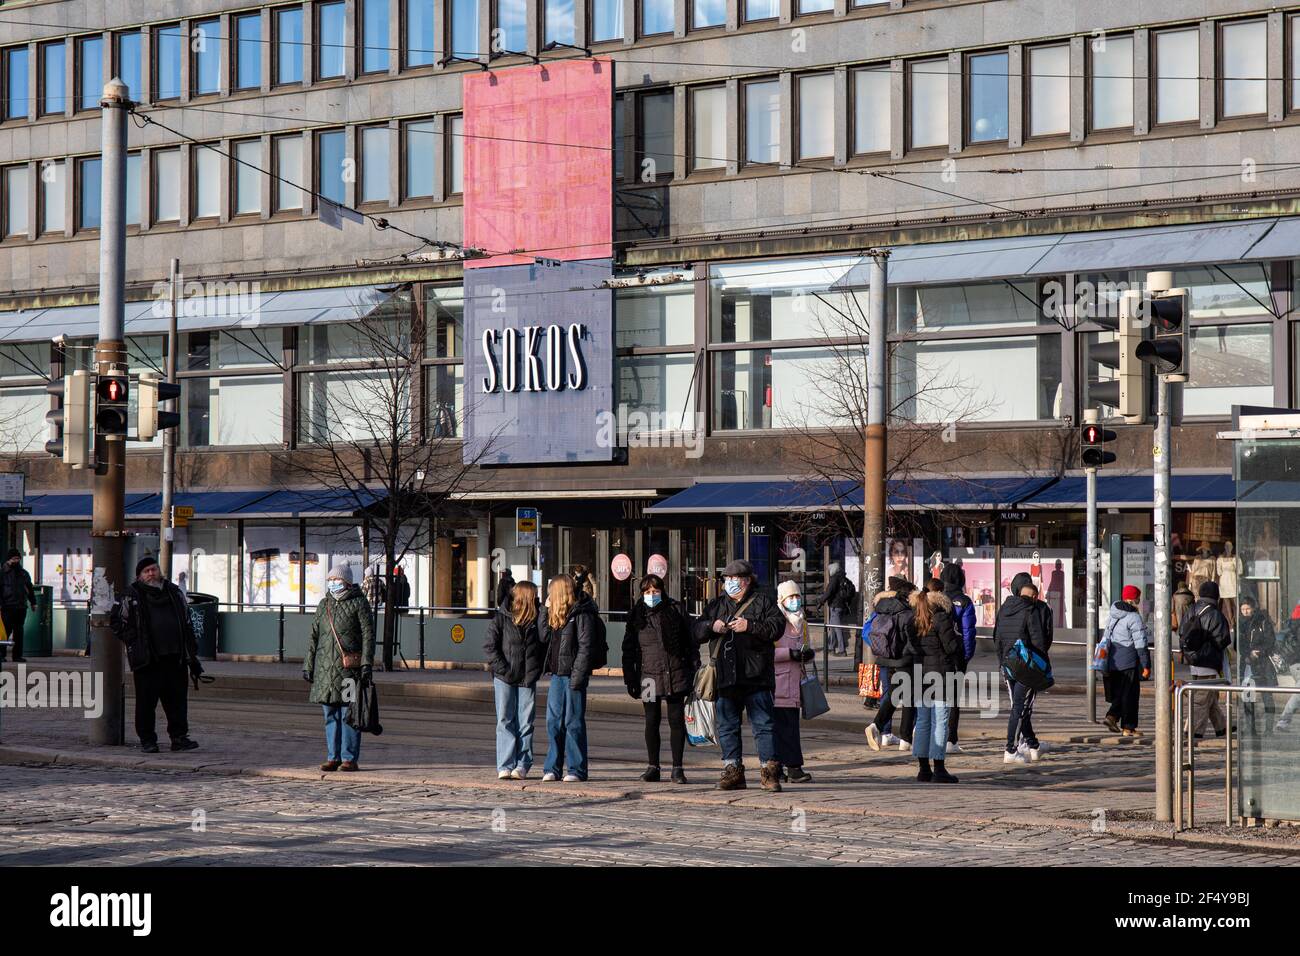 People standing at traffic lights by Mannerheimintie, Sokos department store in the background, in Helsinki, Finland. Stock Photo